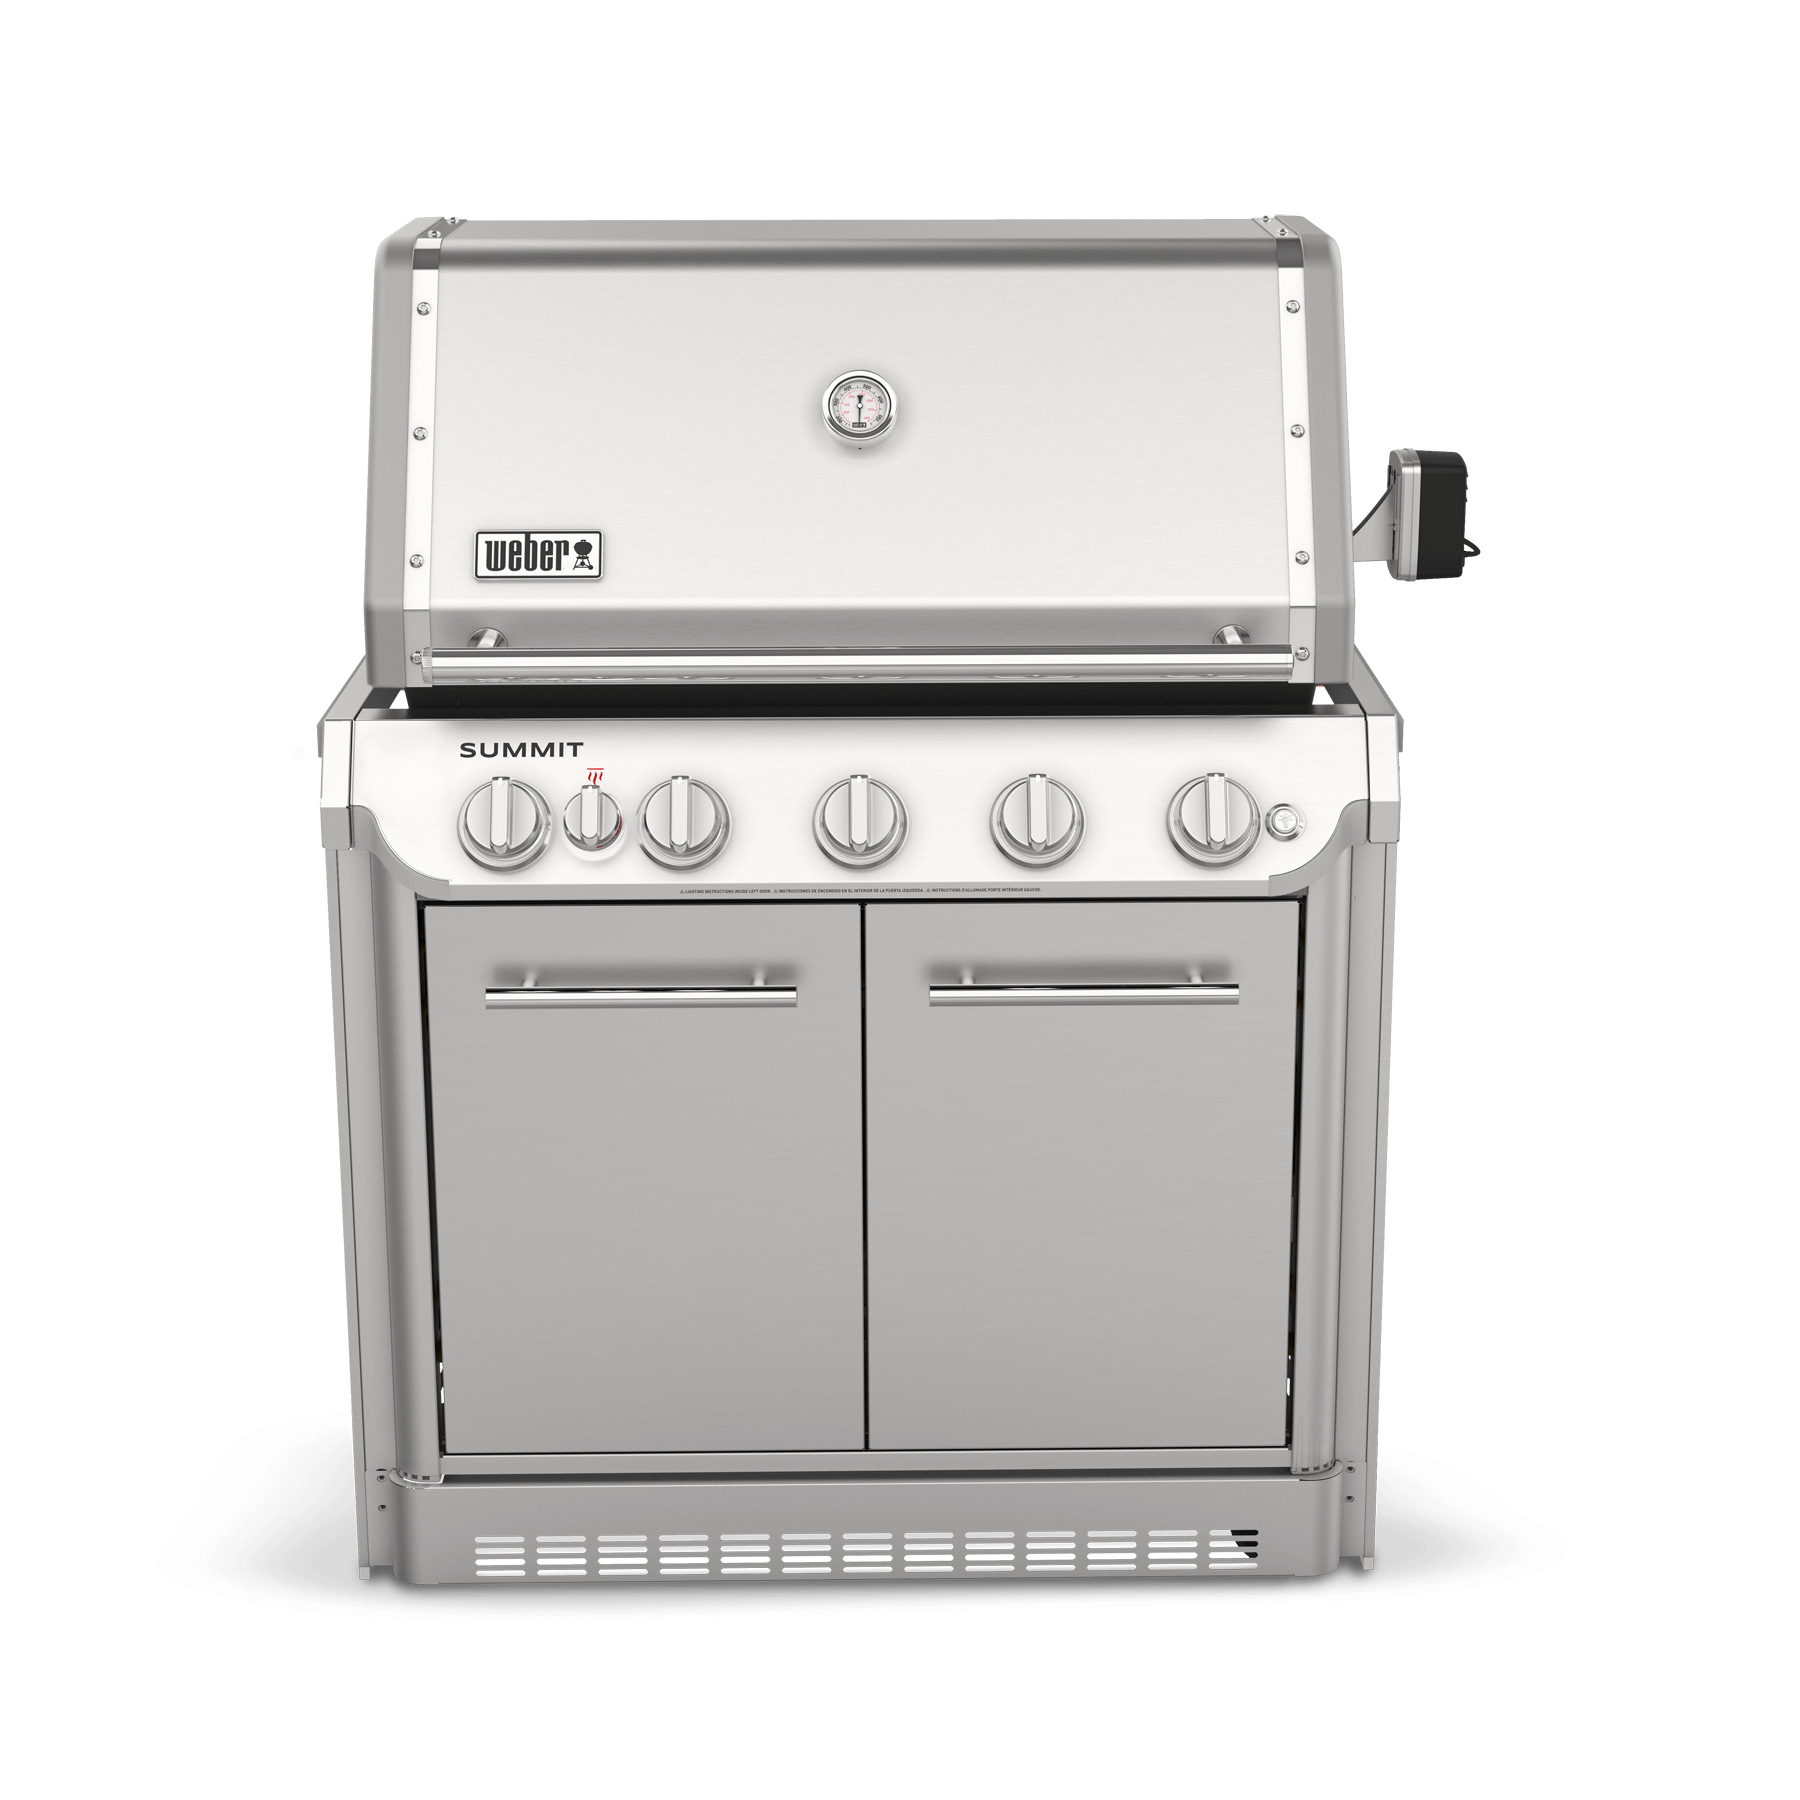 Weber 1500042 Summit? Sb38 S Built-In Gas Grill (Liquid Propane) - Stainless Steel